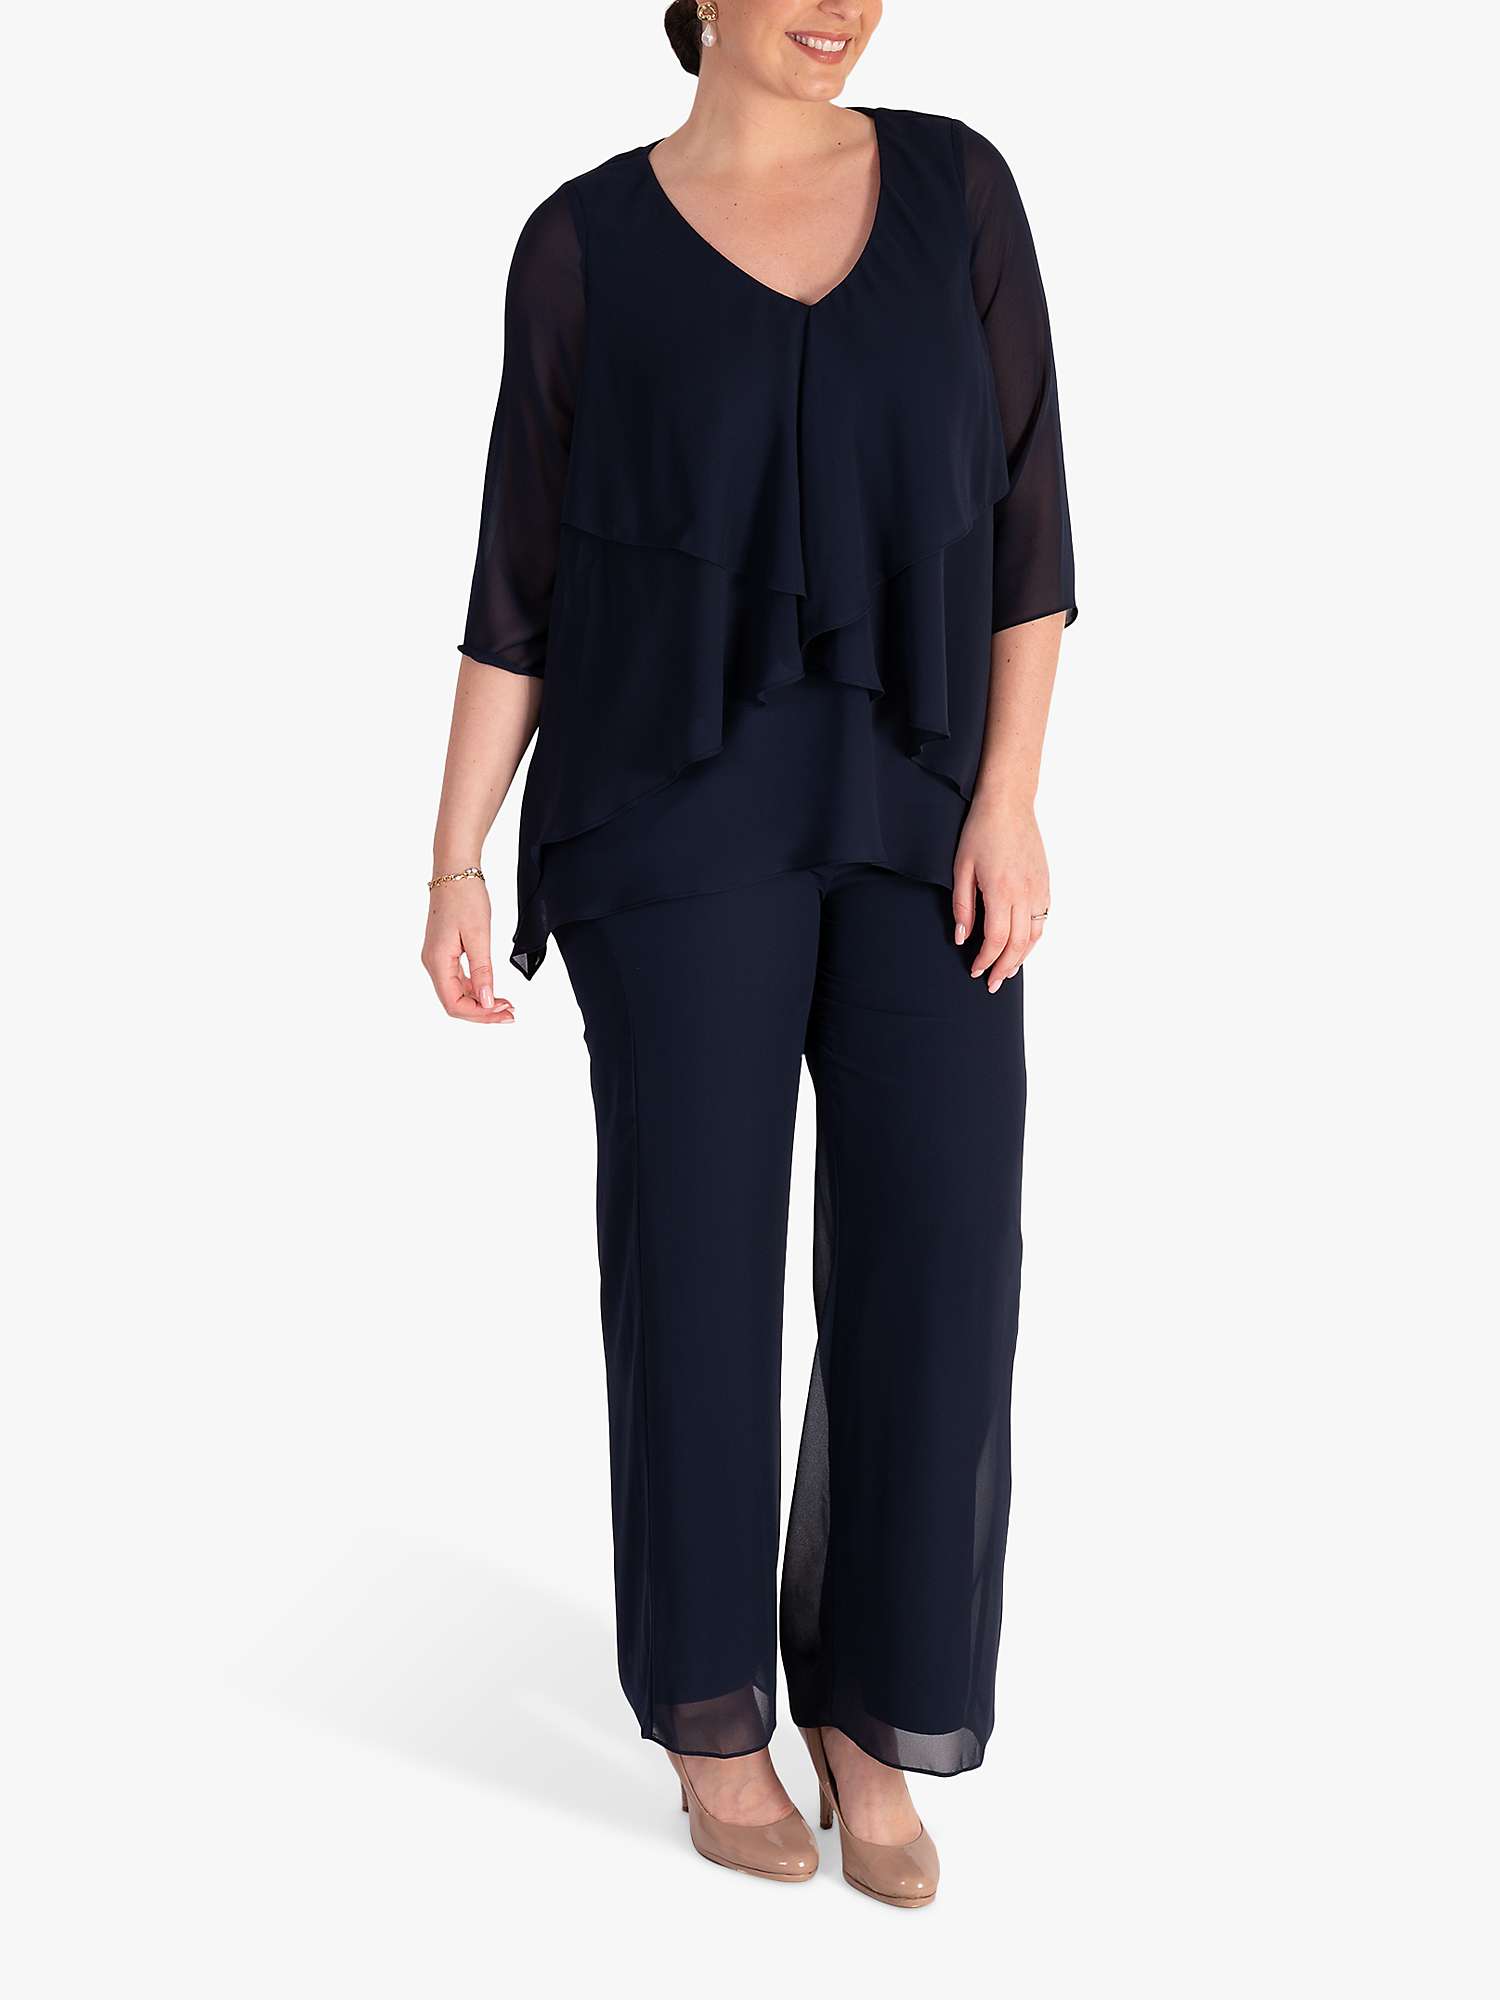 Buy chesca Fancy Layered V-Neck Top Online at johnlewis.com